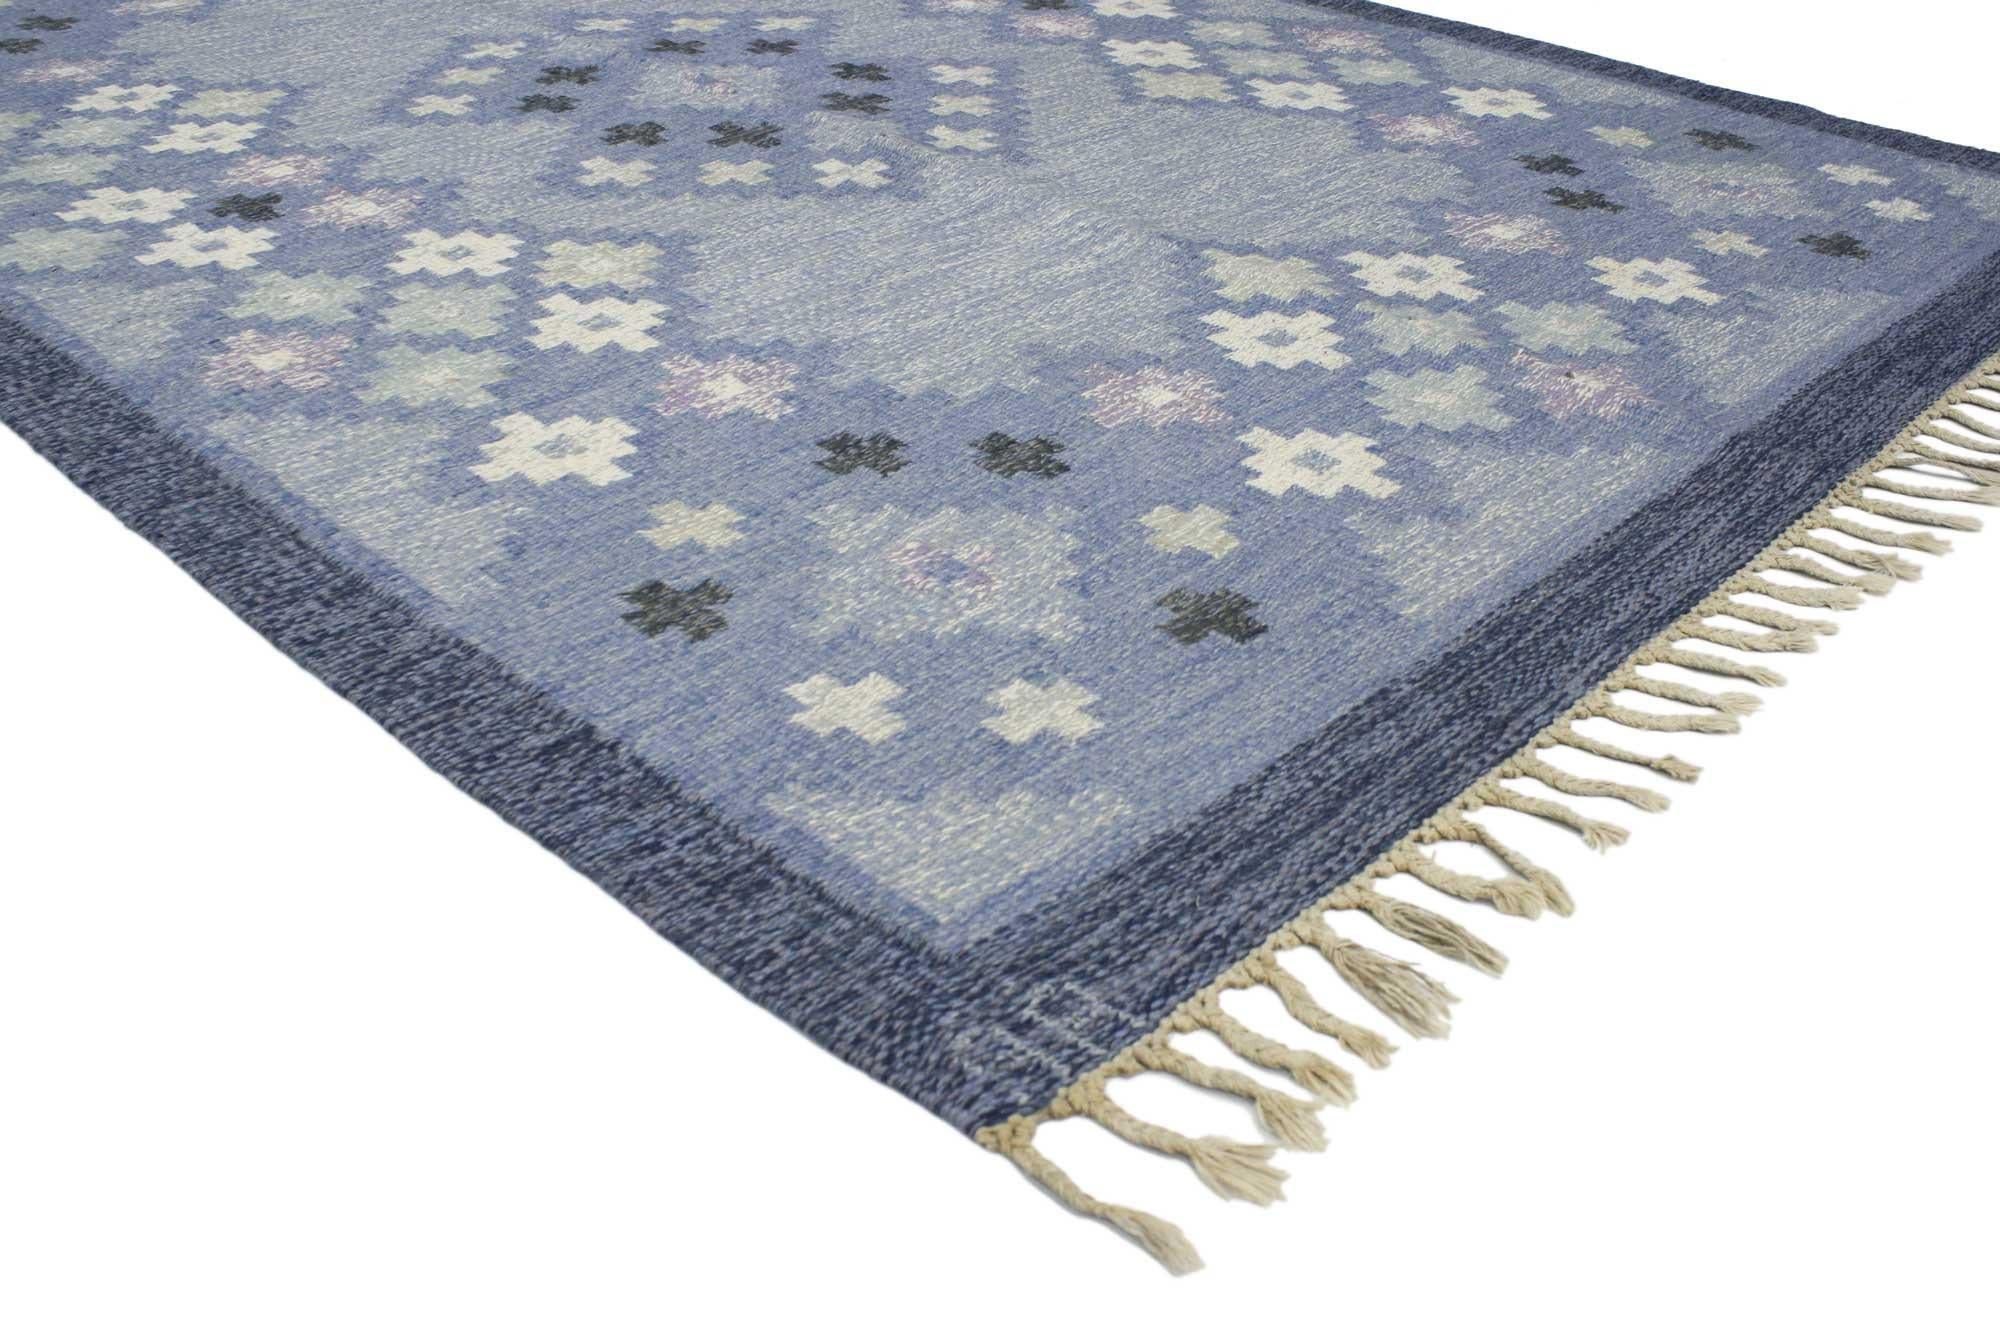 ?77036 vintage Swedish Kilim Rollakan rug by Asa Akerlund, 05'06 x 07'08.
Emboding the simplicity of Scandinavian Modern style with incredible detail and texture, this handwoven vintage Swedish rollakan rug is a captivating vision of woven beauty.